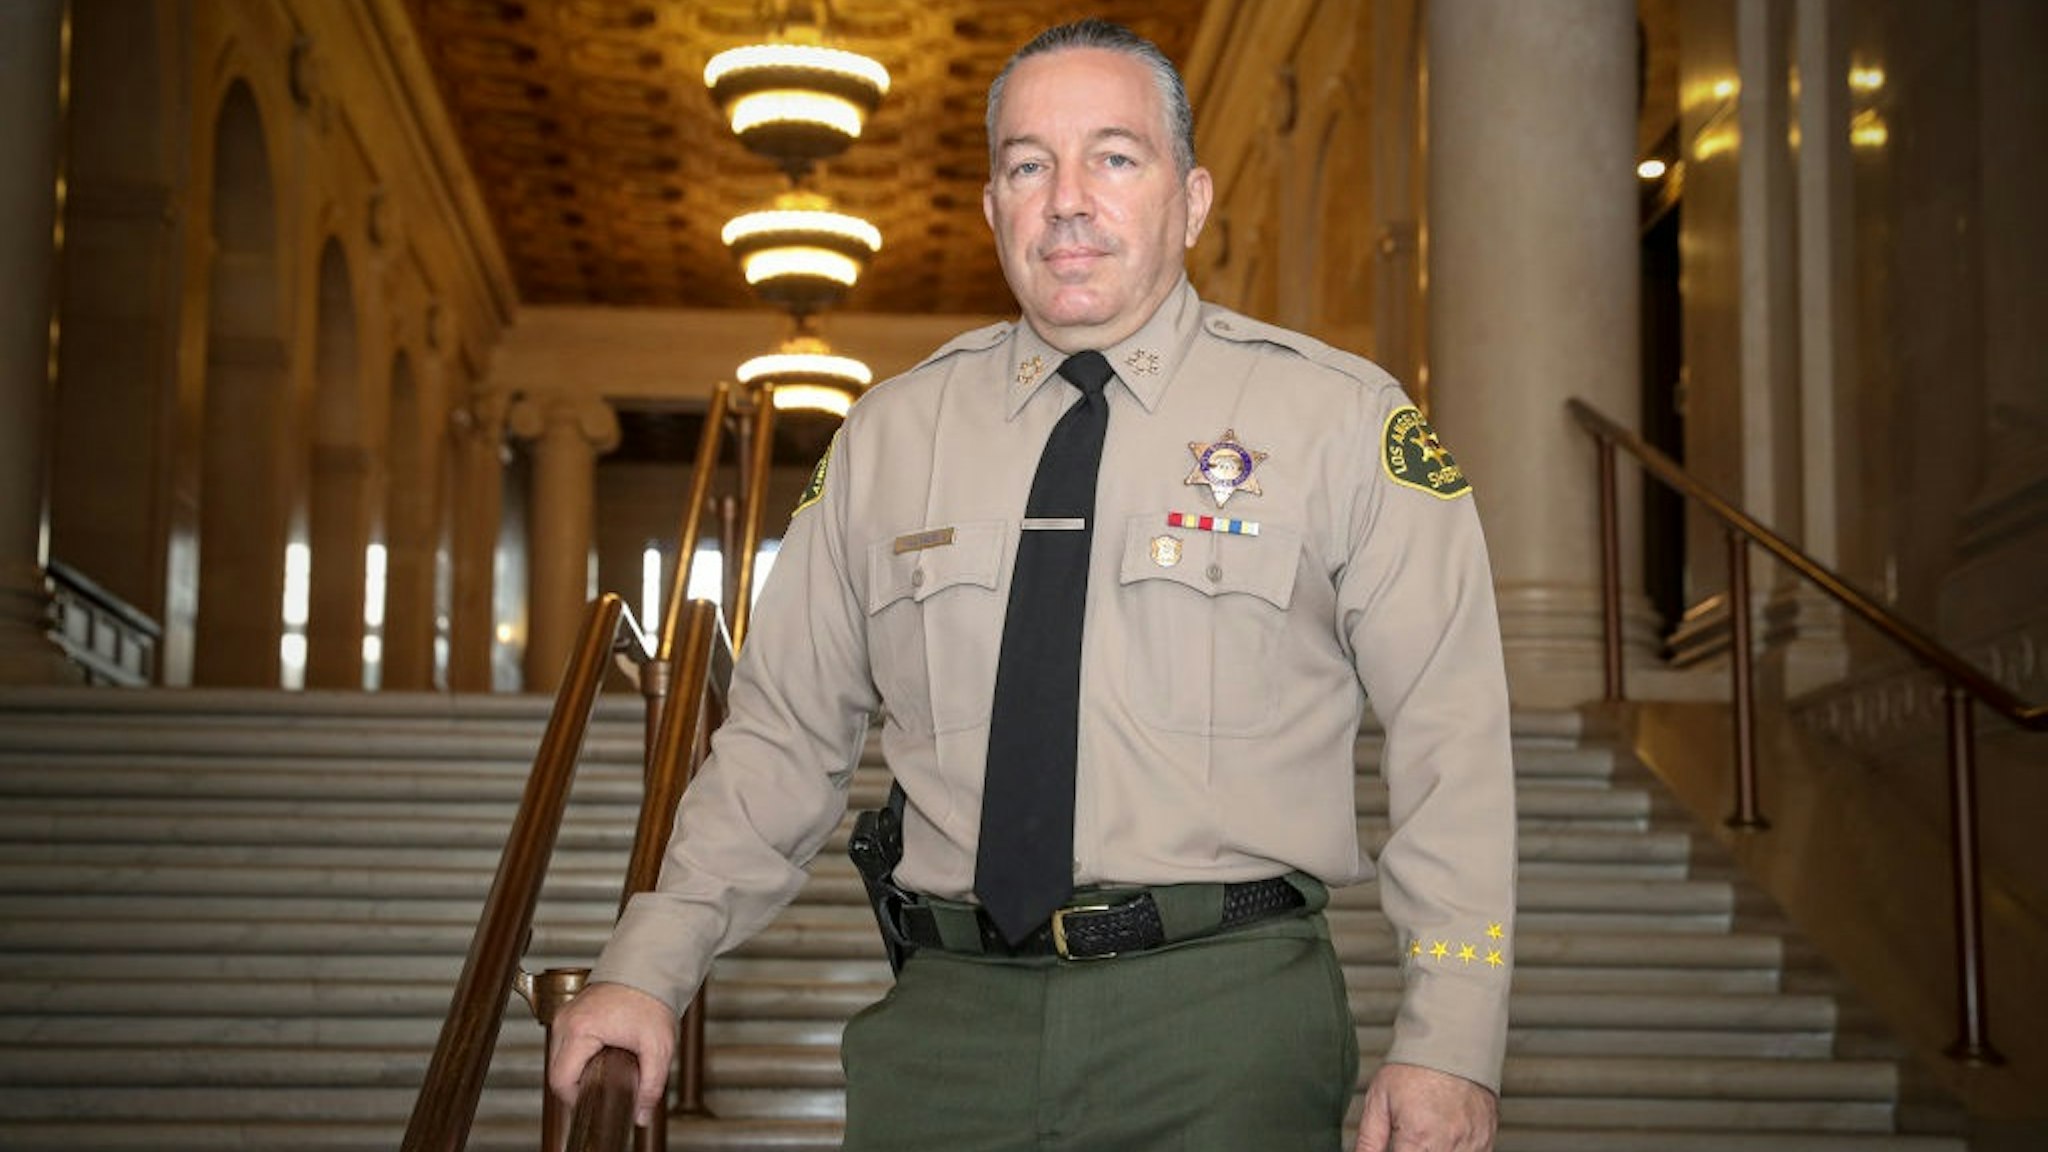 LOS ANGELES, CA - AUGUST 12: Sheriff Alex Villanueva photographed in Hall of Justice on Wednesday, Aug. 12, 2020 in Los Angeles, CA.